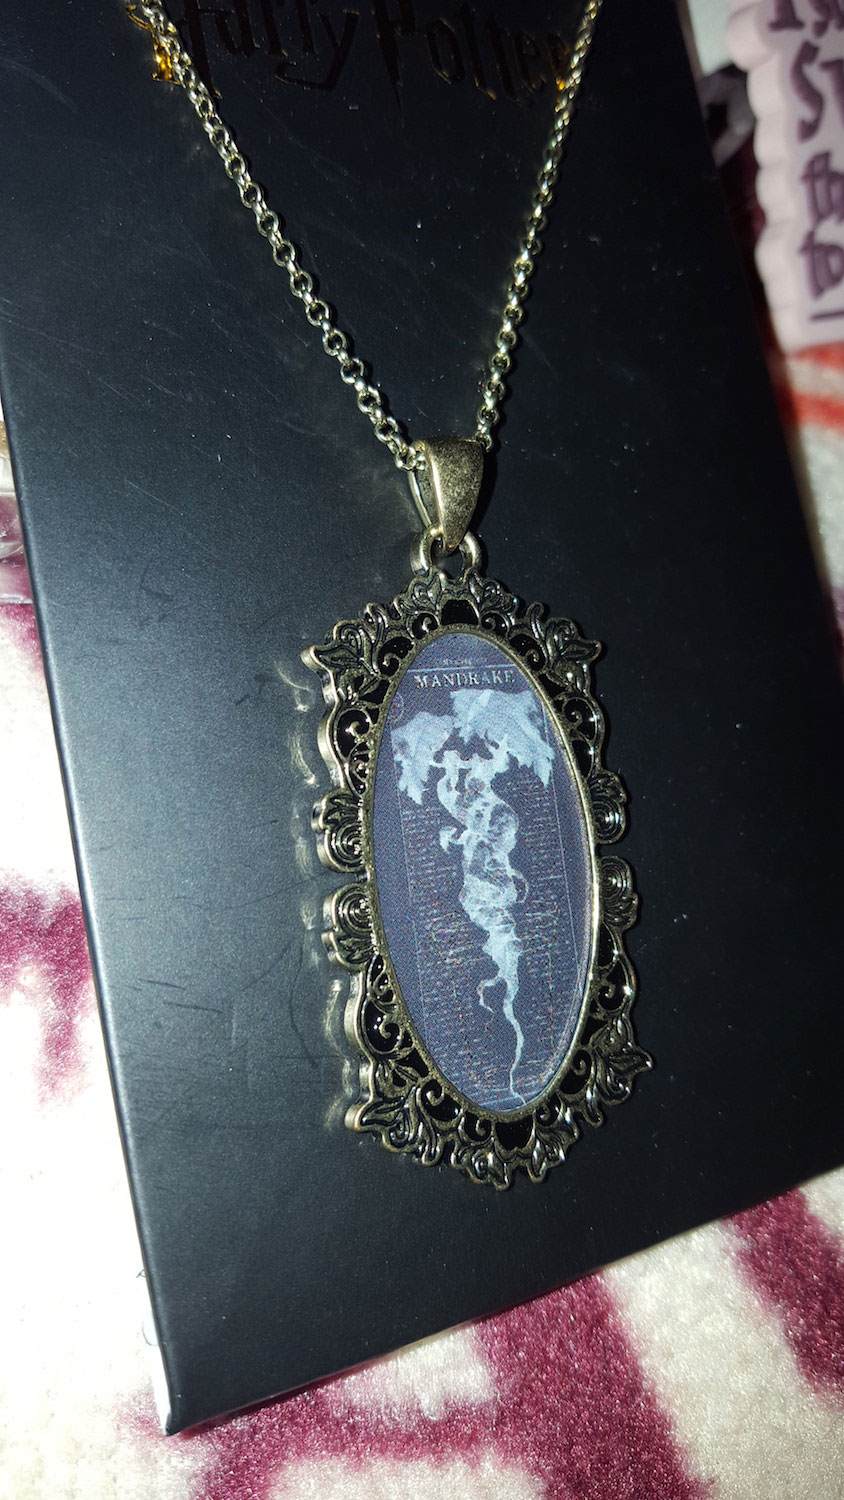 Necklace included in this month’s limited-edition box